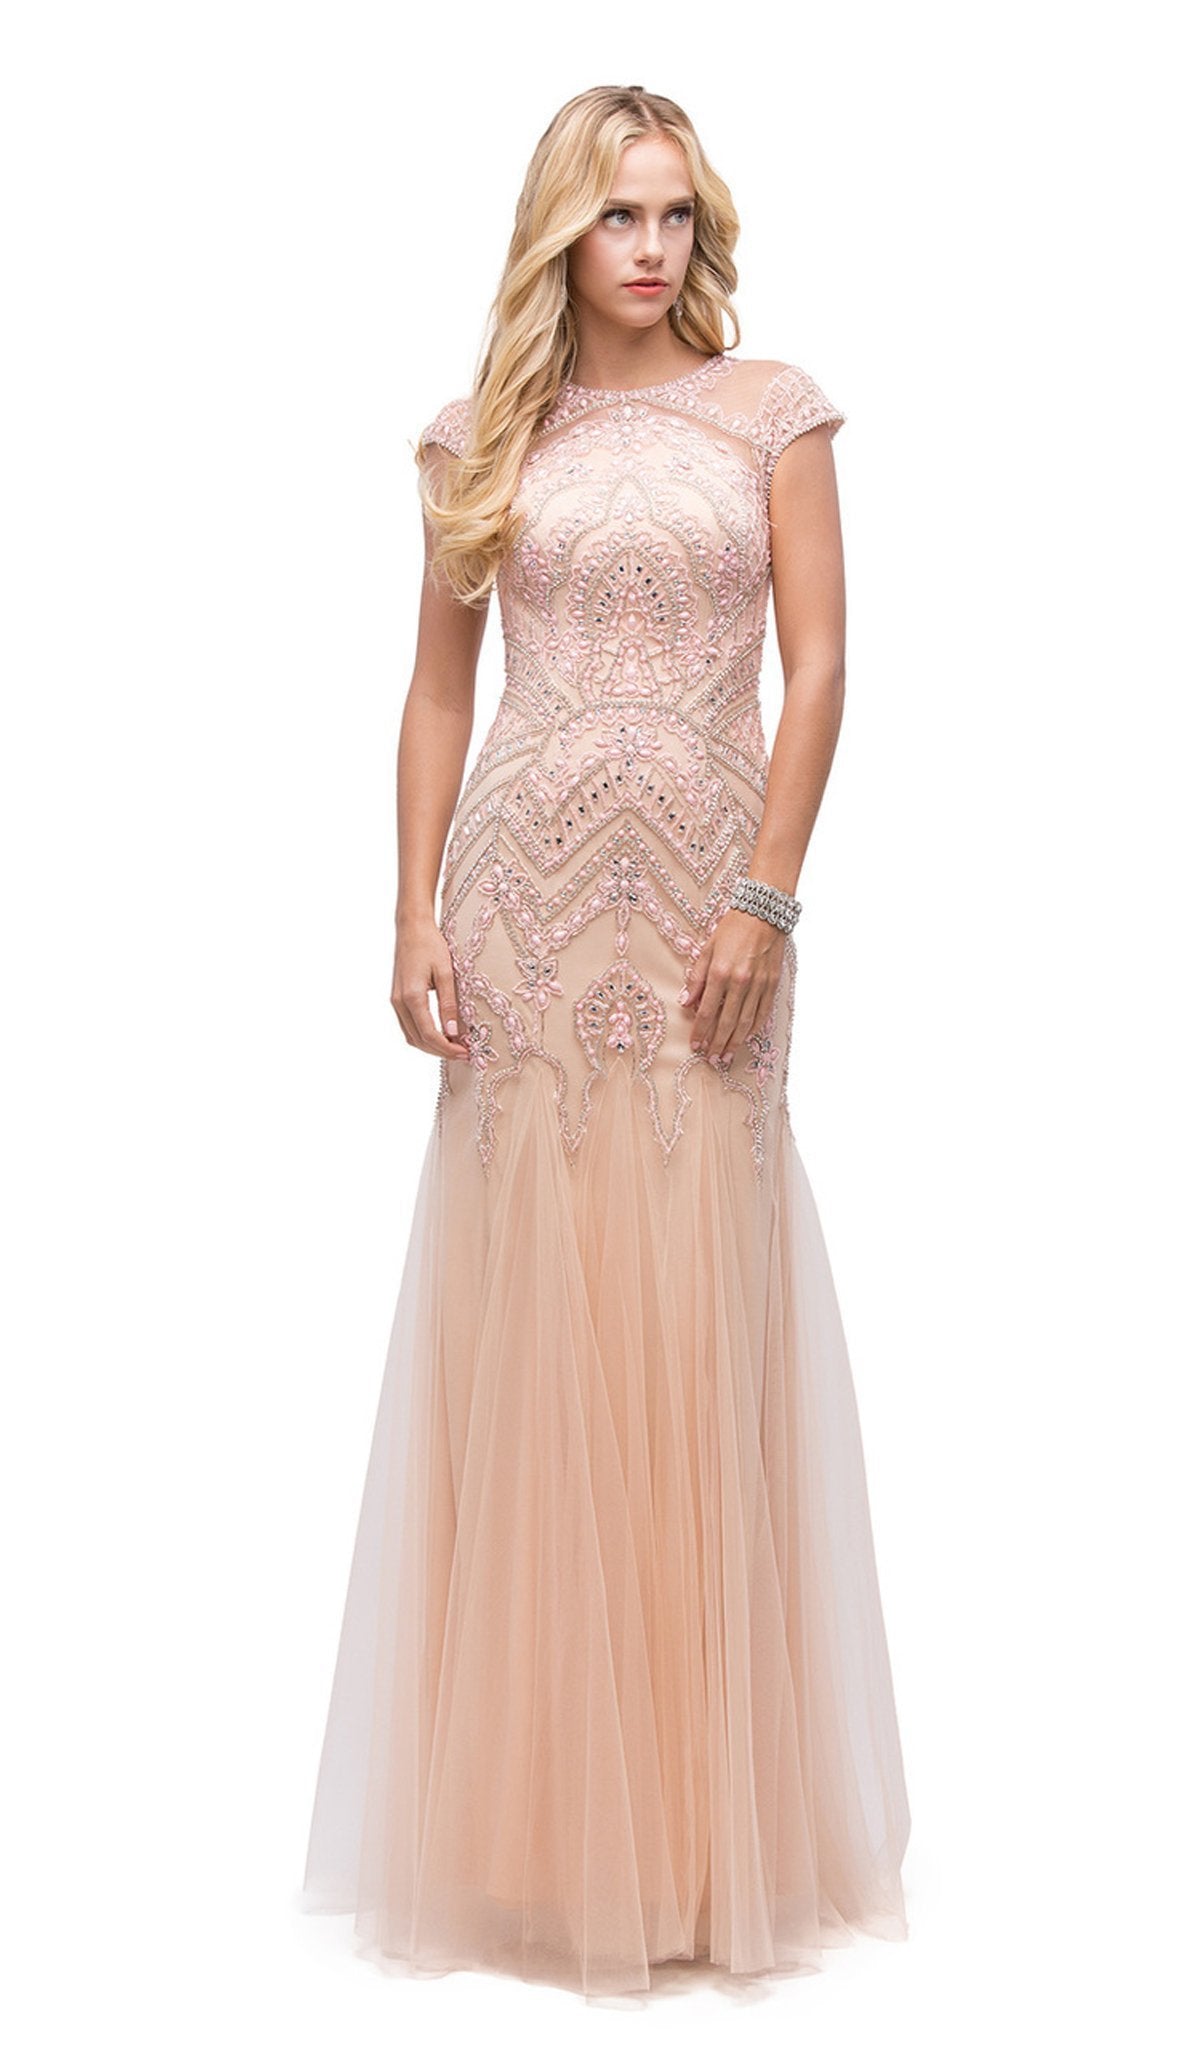 Dancing Queen - 9734 Lace Beaded Ornate Mermaid Dress Special Occasion Dress XS / Blush